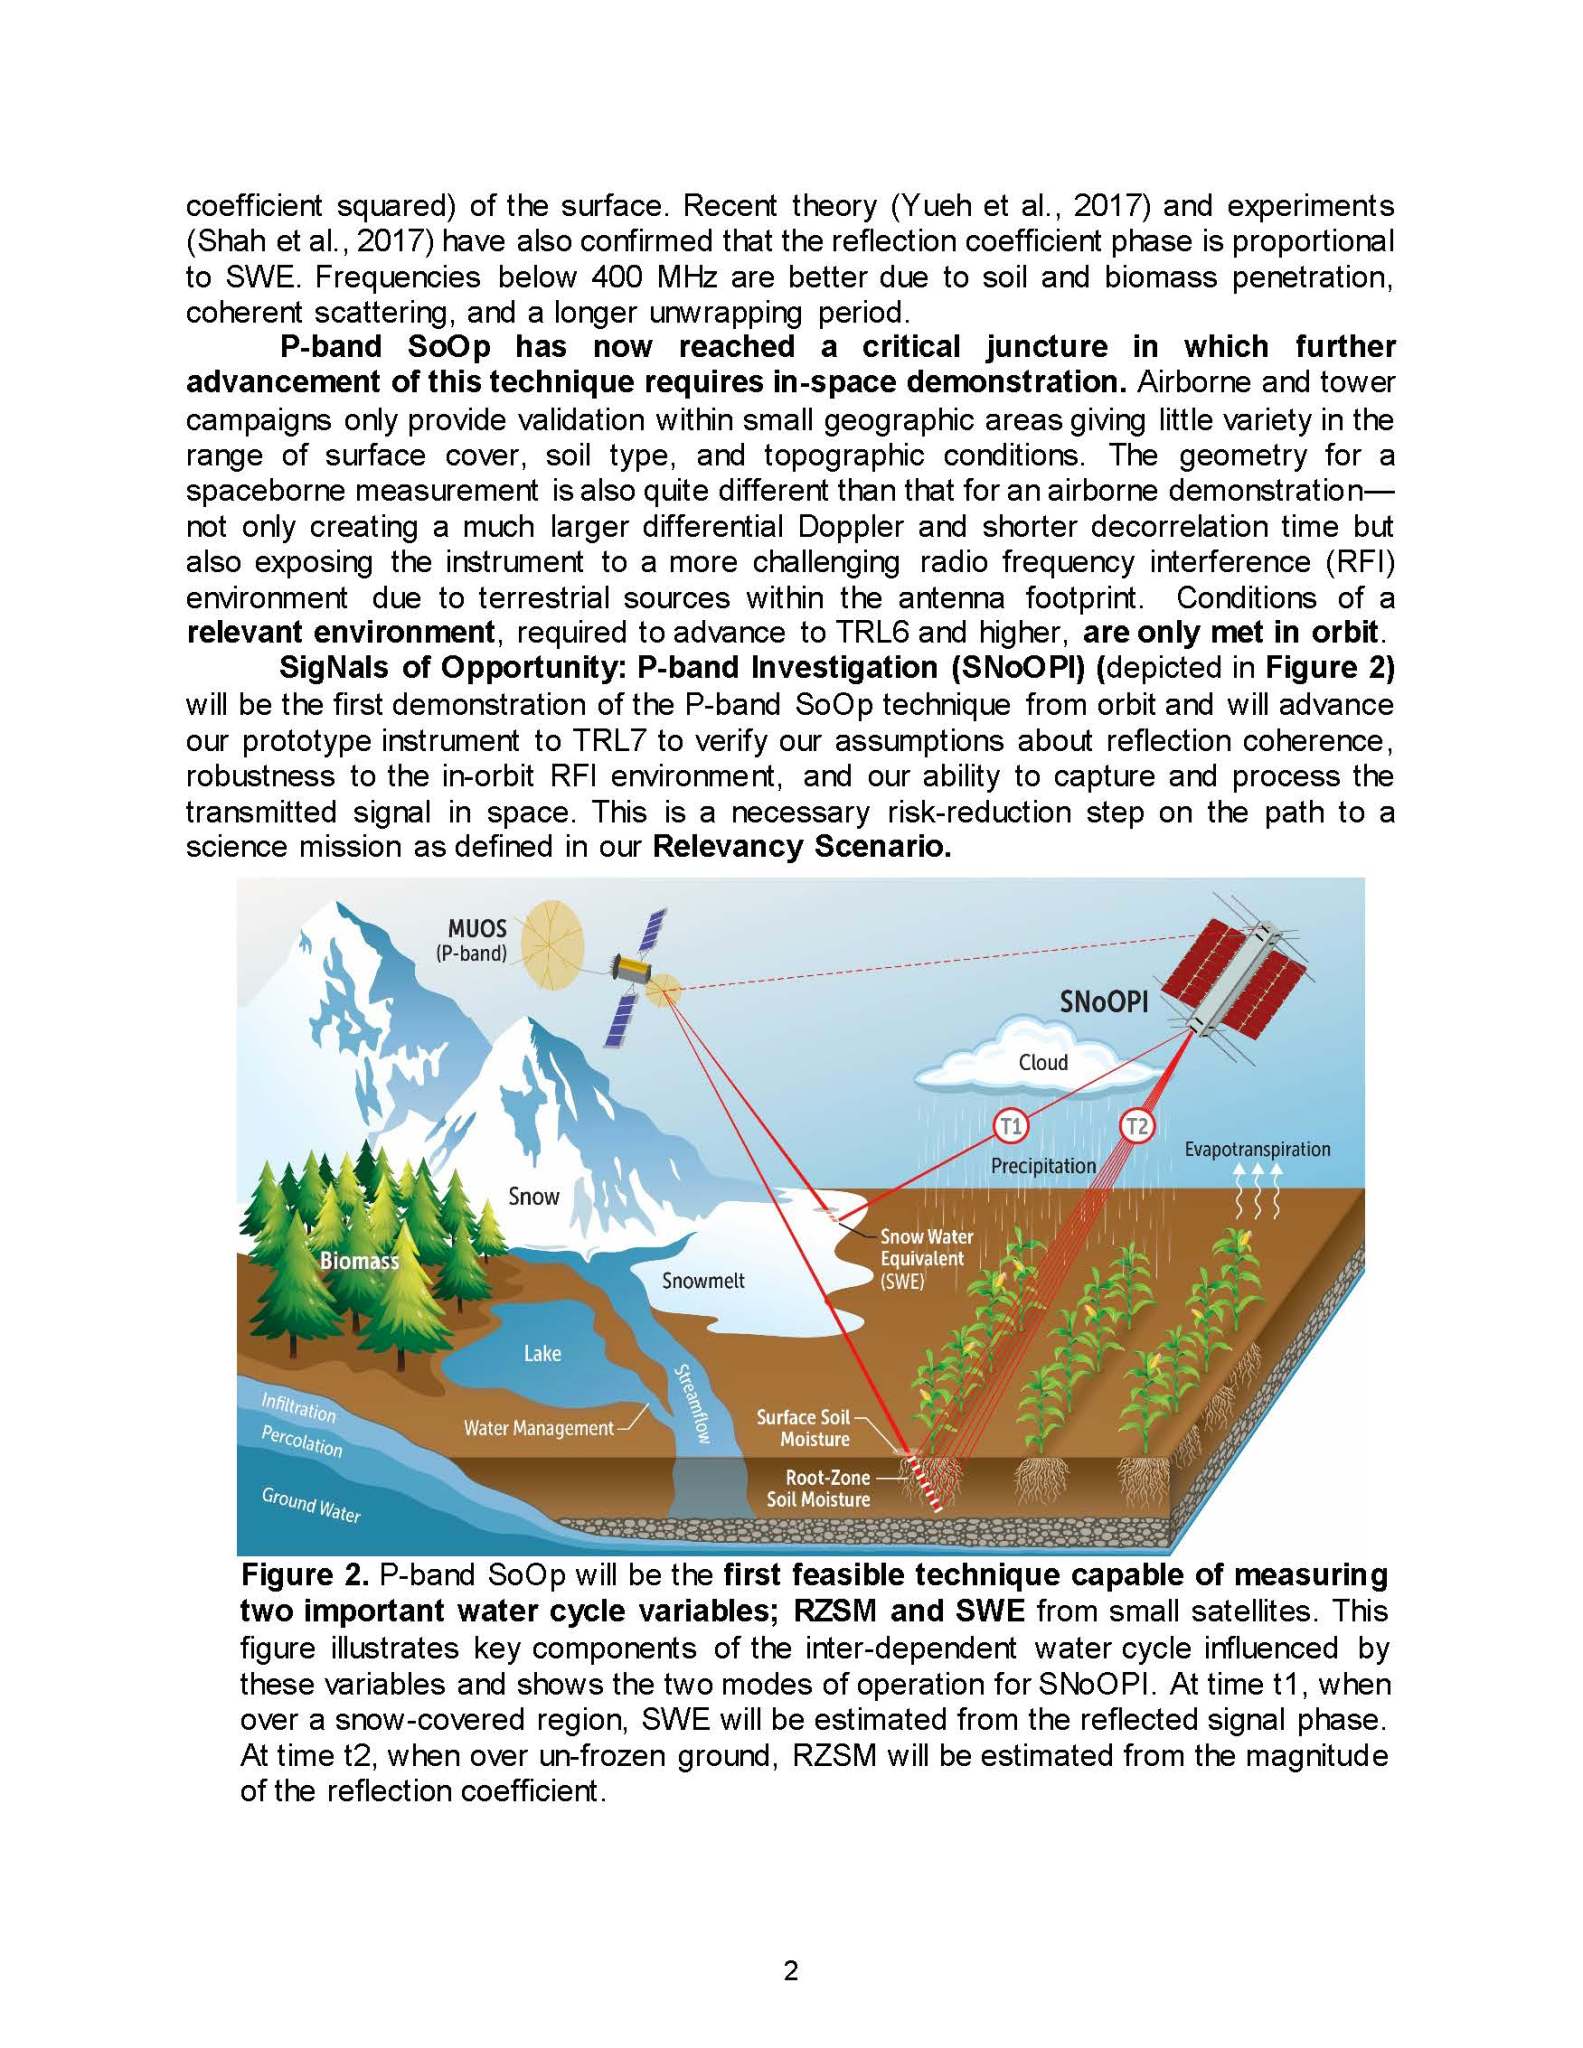 This graphic shows how a technology-demonstration CubeSat, called SNoOPI, will collect soil-moisture measurements at the root.